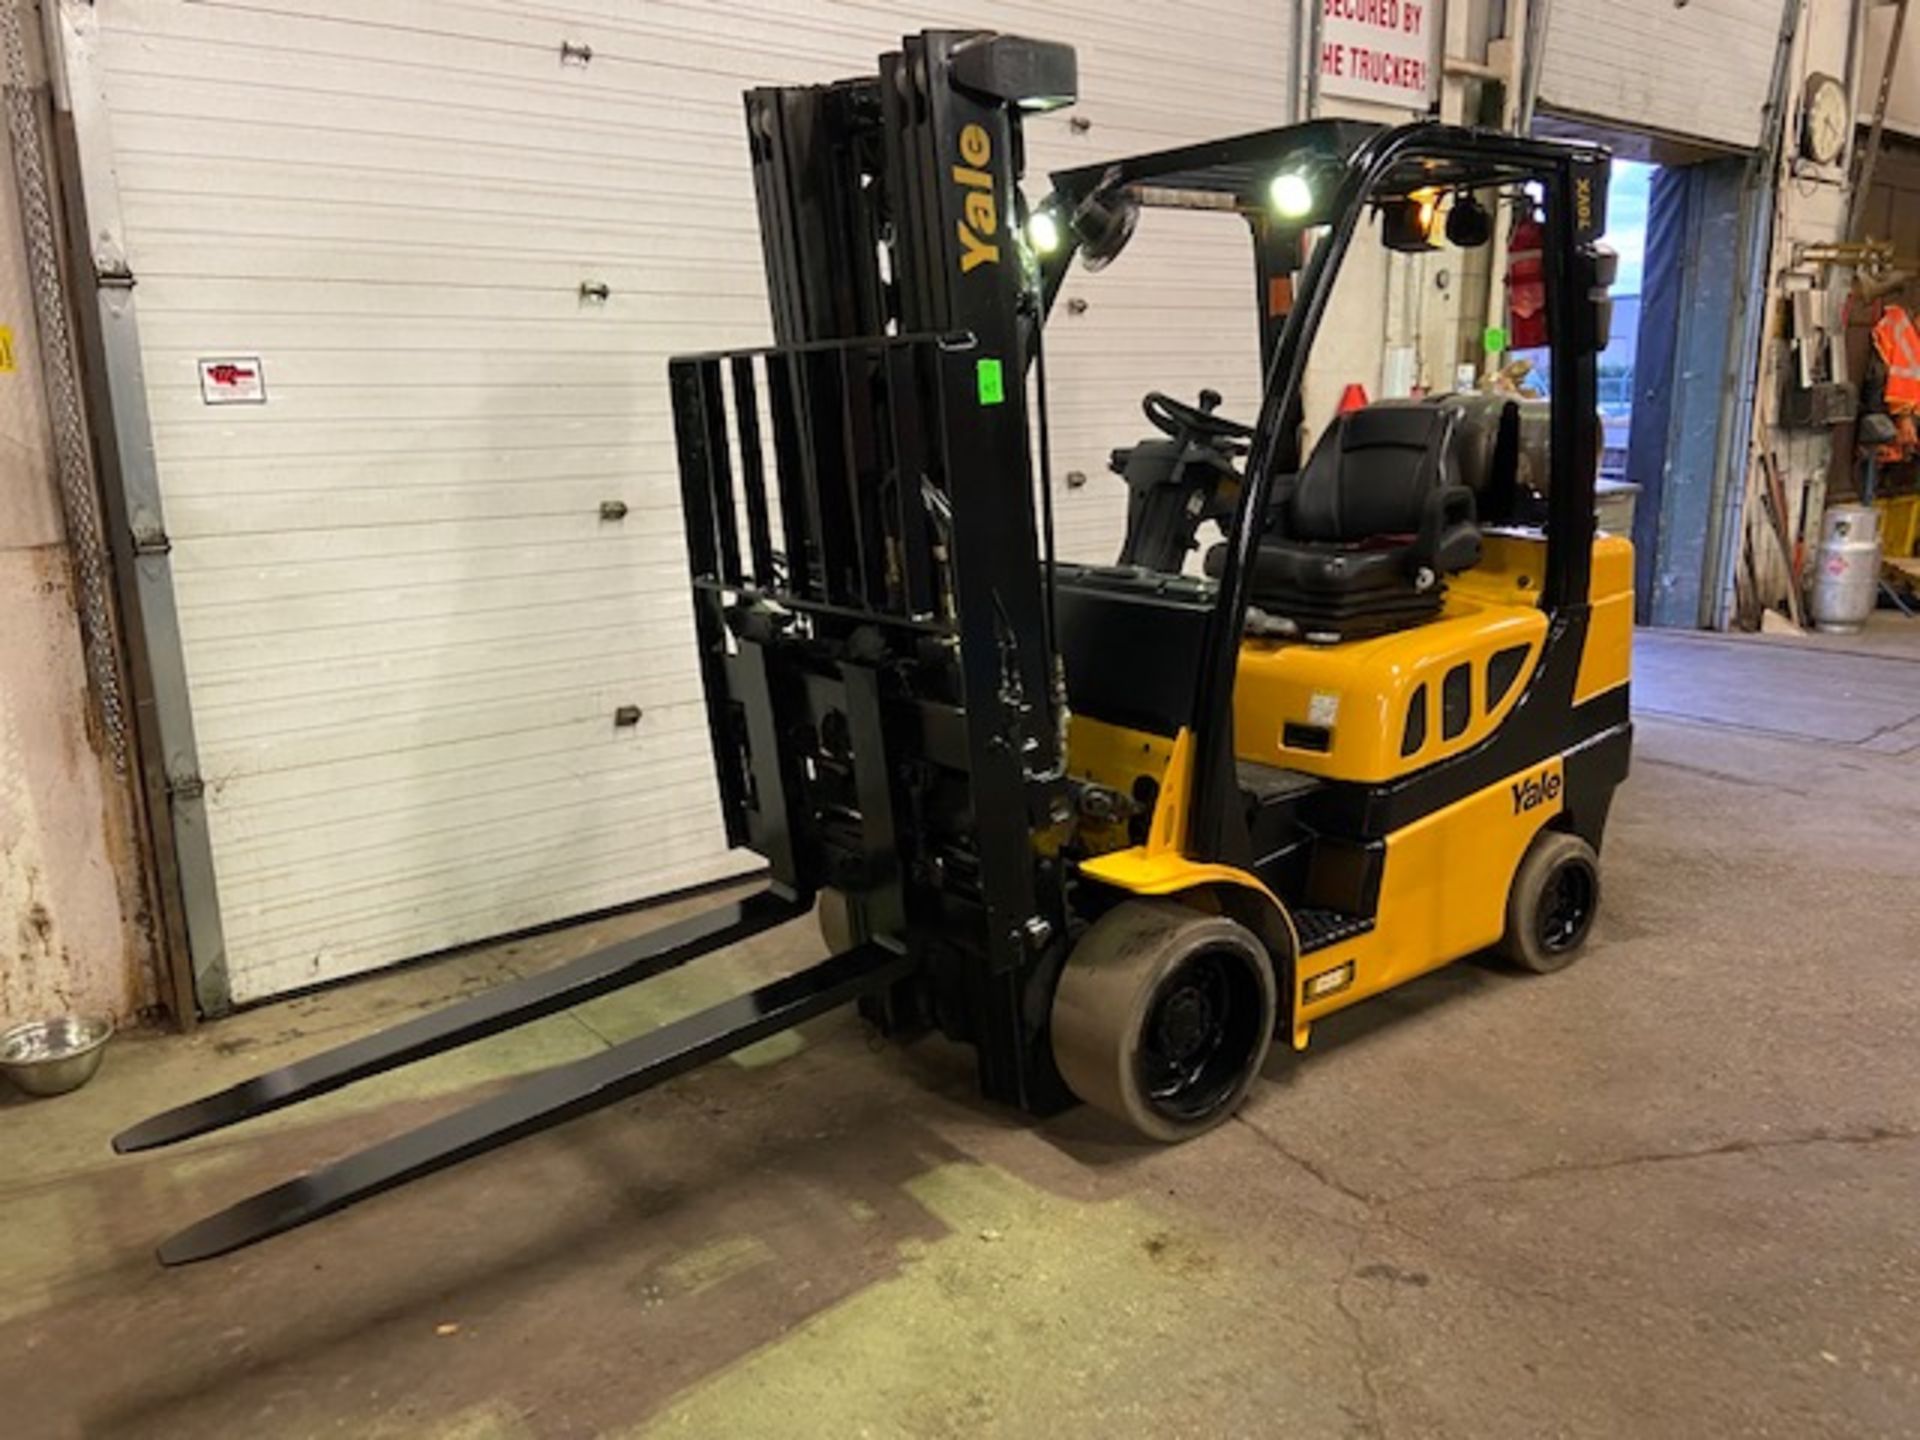 FREE CUSTOMS - 2016 Yale 7000lbs Capacity Forklift LPG (propane) with 3-STAGE MAST with